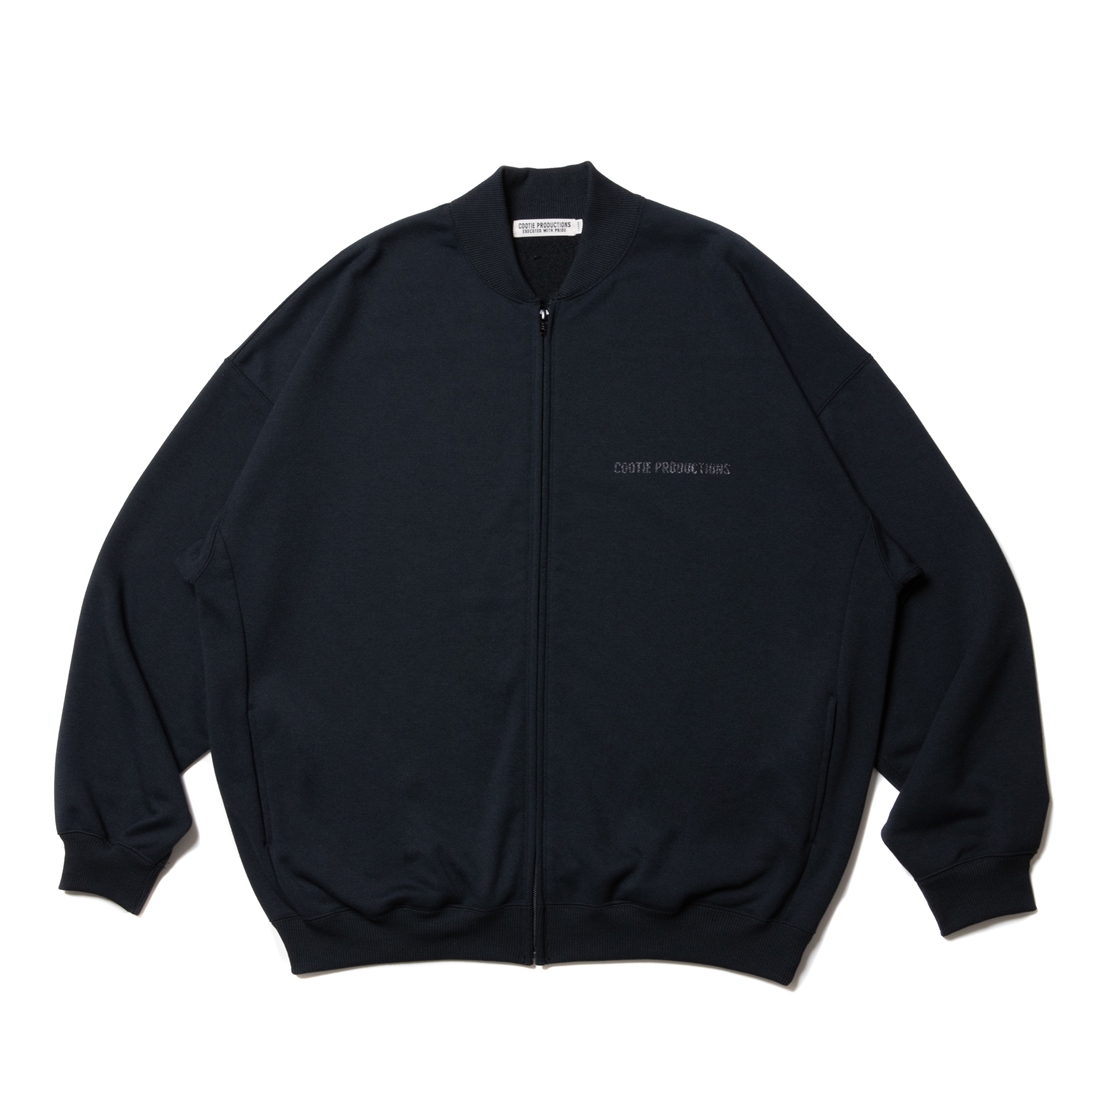 COOTIE Dry Tech Sweat Track Jacket